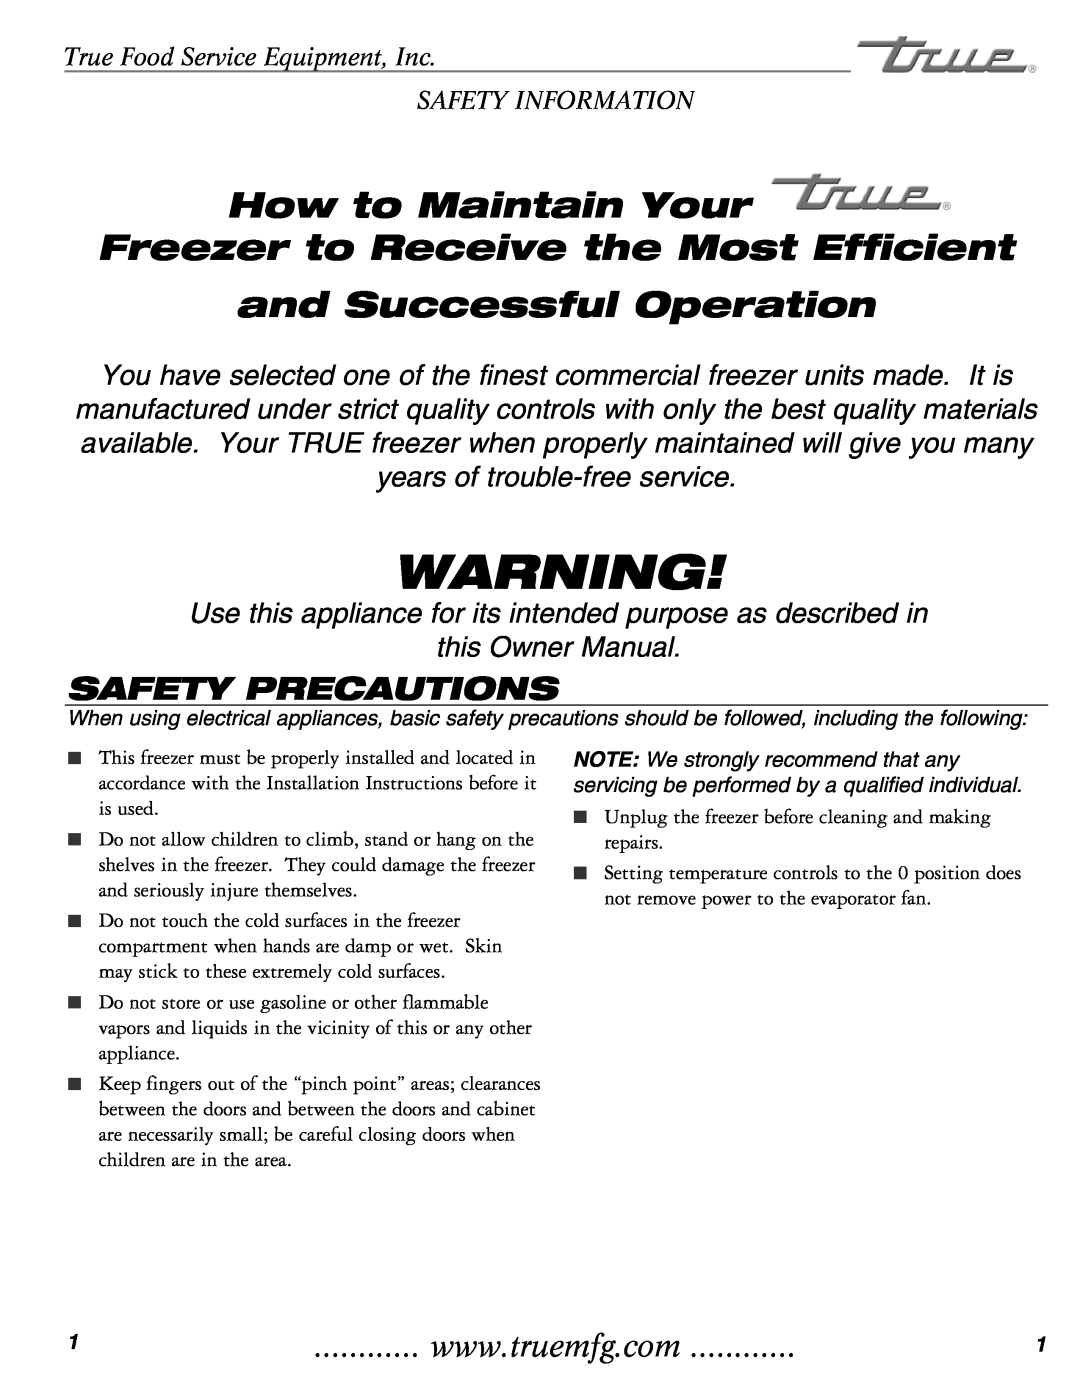 True Manufacturing Company THF-41FL Safety Precautions, True Food Service Equipment, Inc SAFETY INFORMATION 